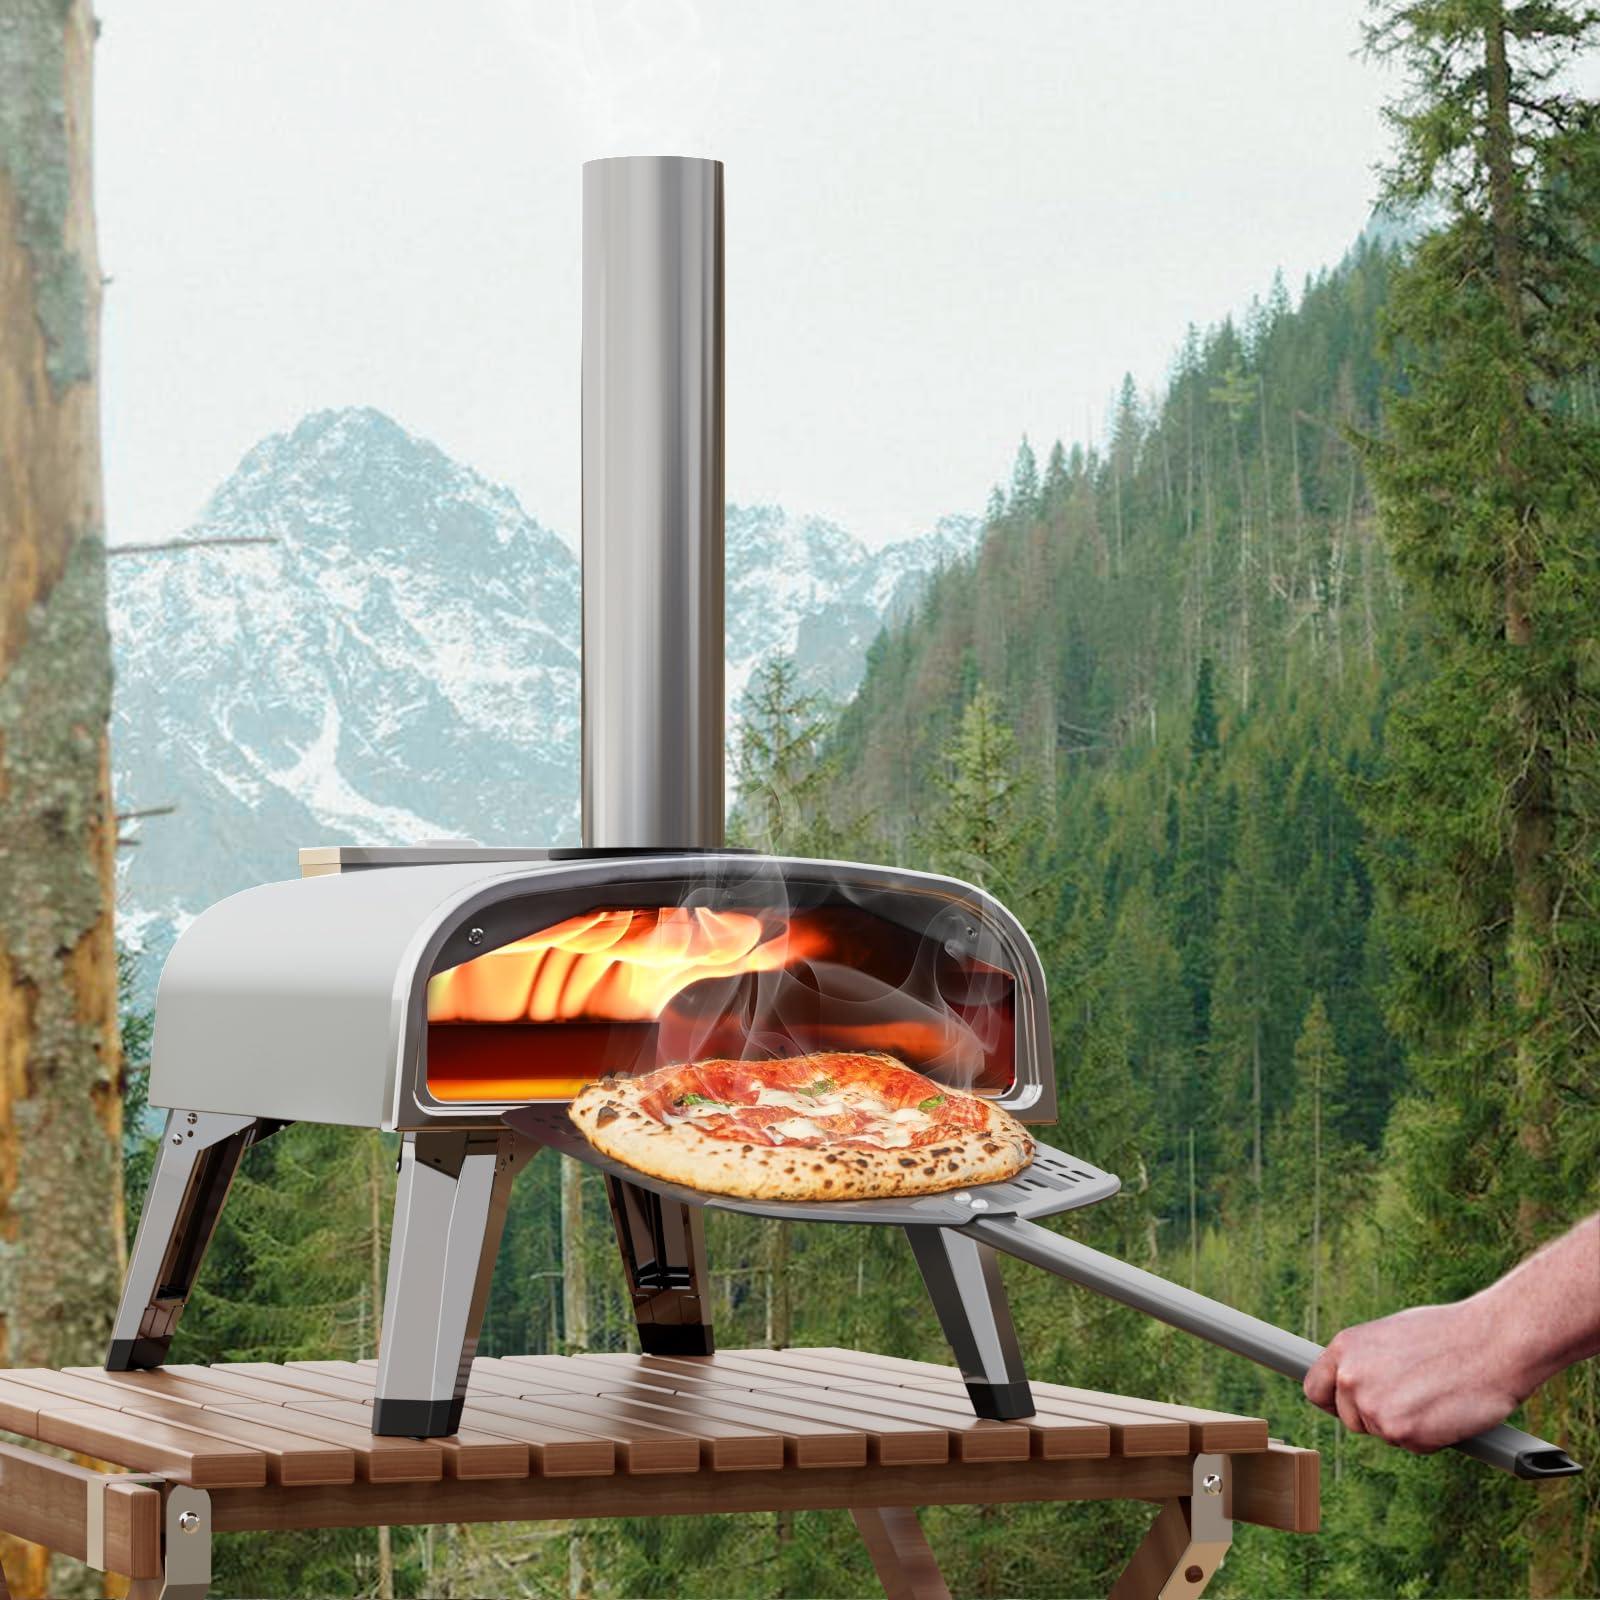 aidpiza Pizza Oven Outdoor 12" Wood Fired Pizza Ovens Pellet Pizza Stove for Outside, Portable Stainless Steel Pizza Oven for Backyard Pizza Maker Portable Mobile Outdoor Kitchen (Grey-01) - CookCave